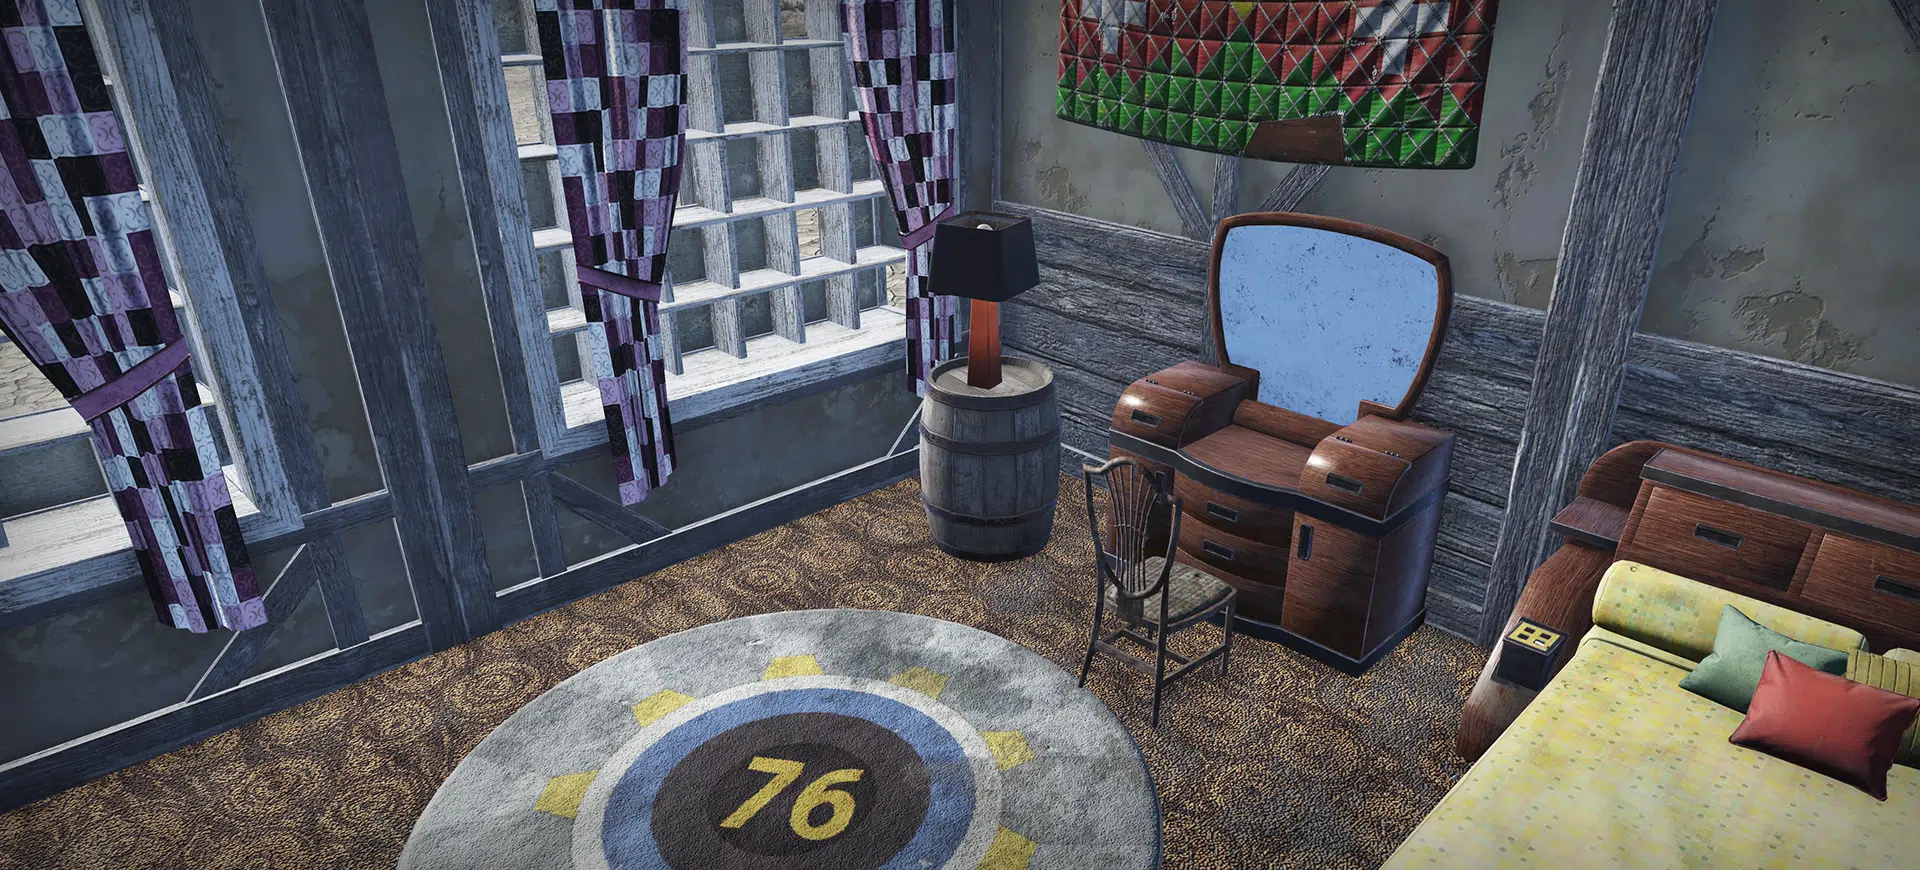 Fallout 76 weekly update for March 19